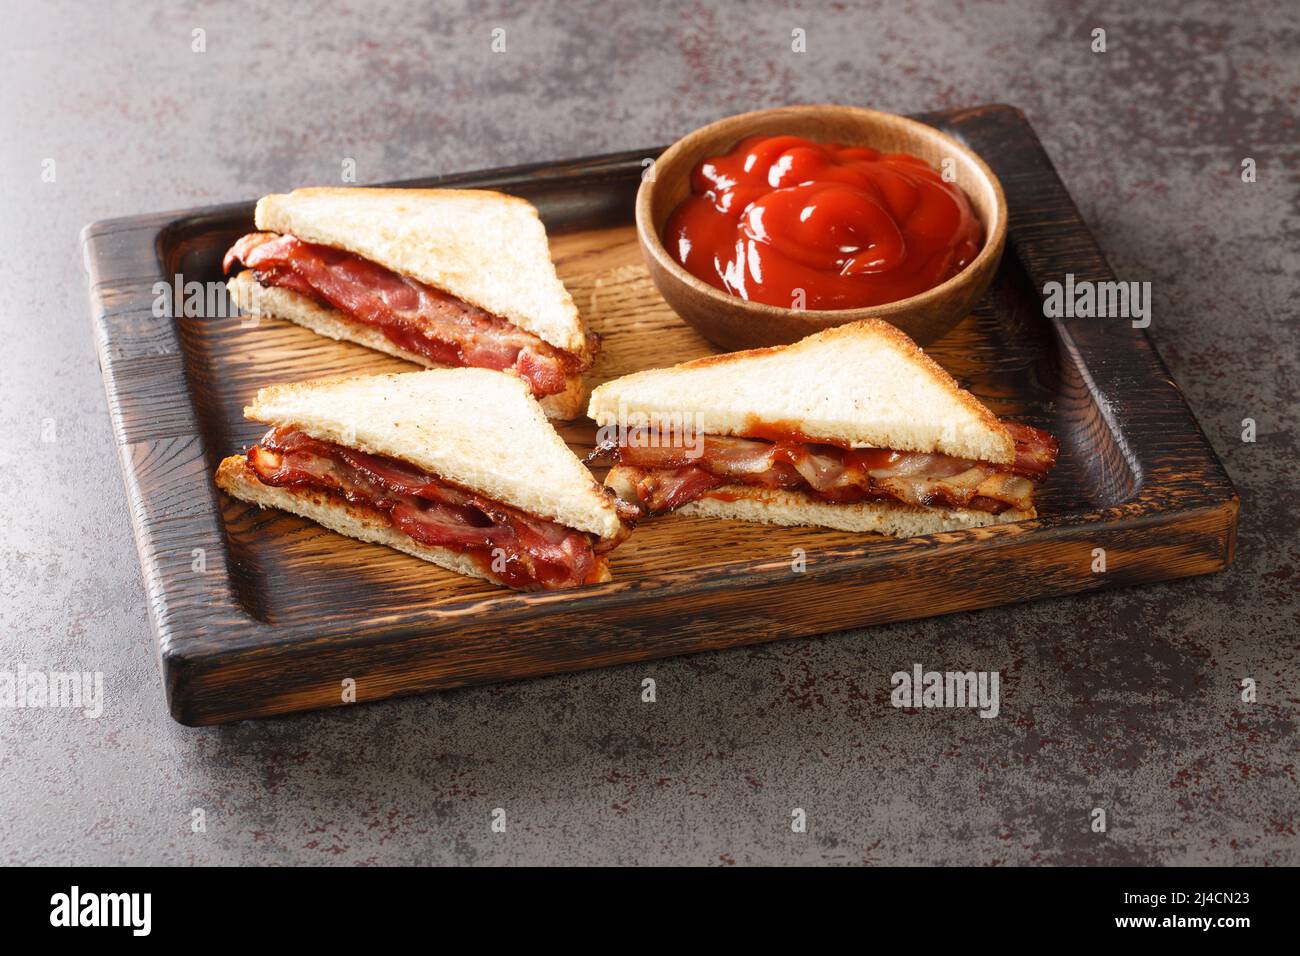 English Bacon Sandwich closeup in the wooden tray on the table. Horizontal Stock Photo